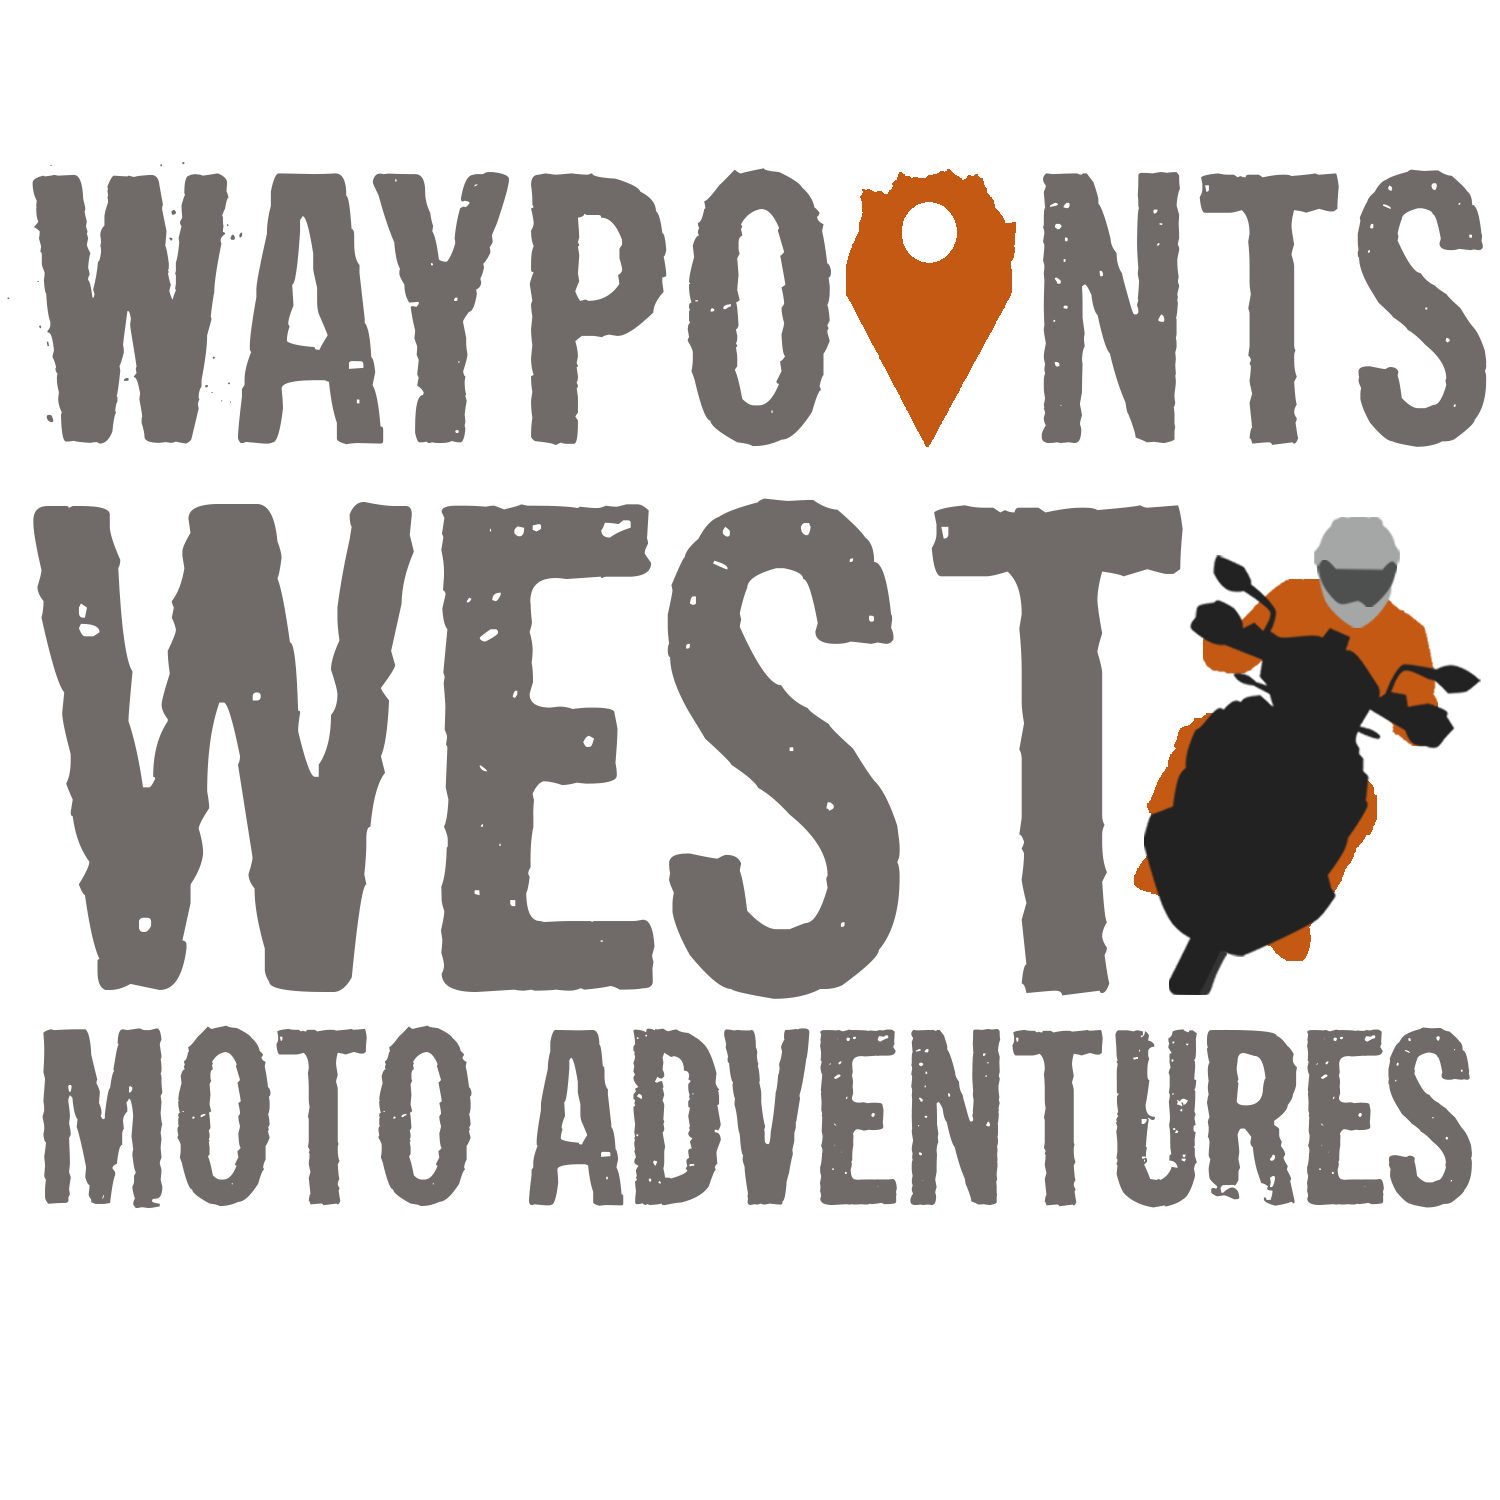 Waypoints West moto, off road motorcycle, bdr meaning, motorcycle rental near me, atv rentals near me